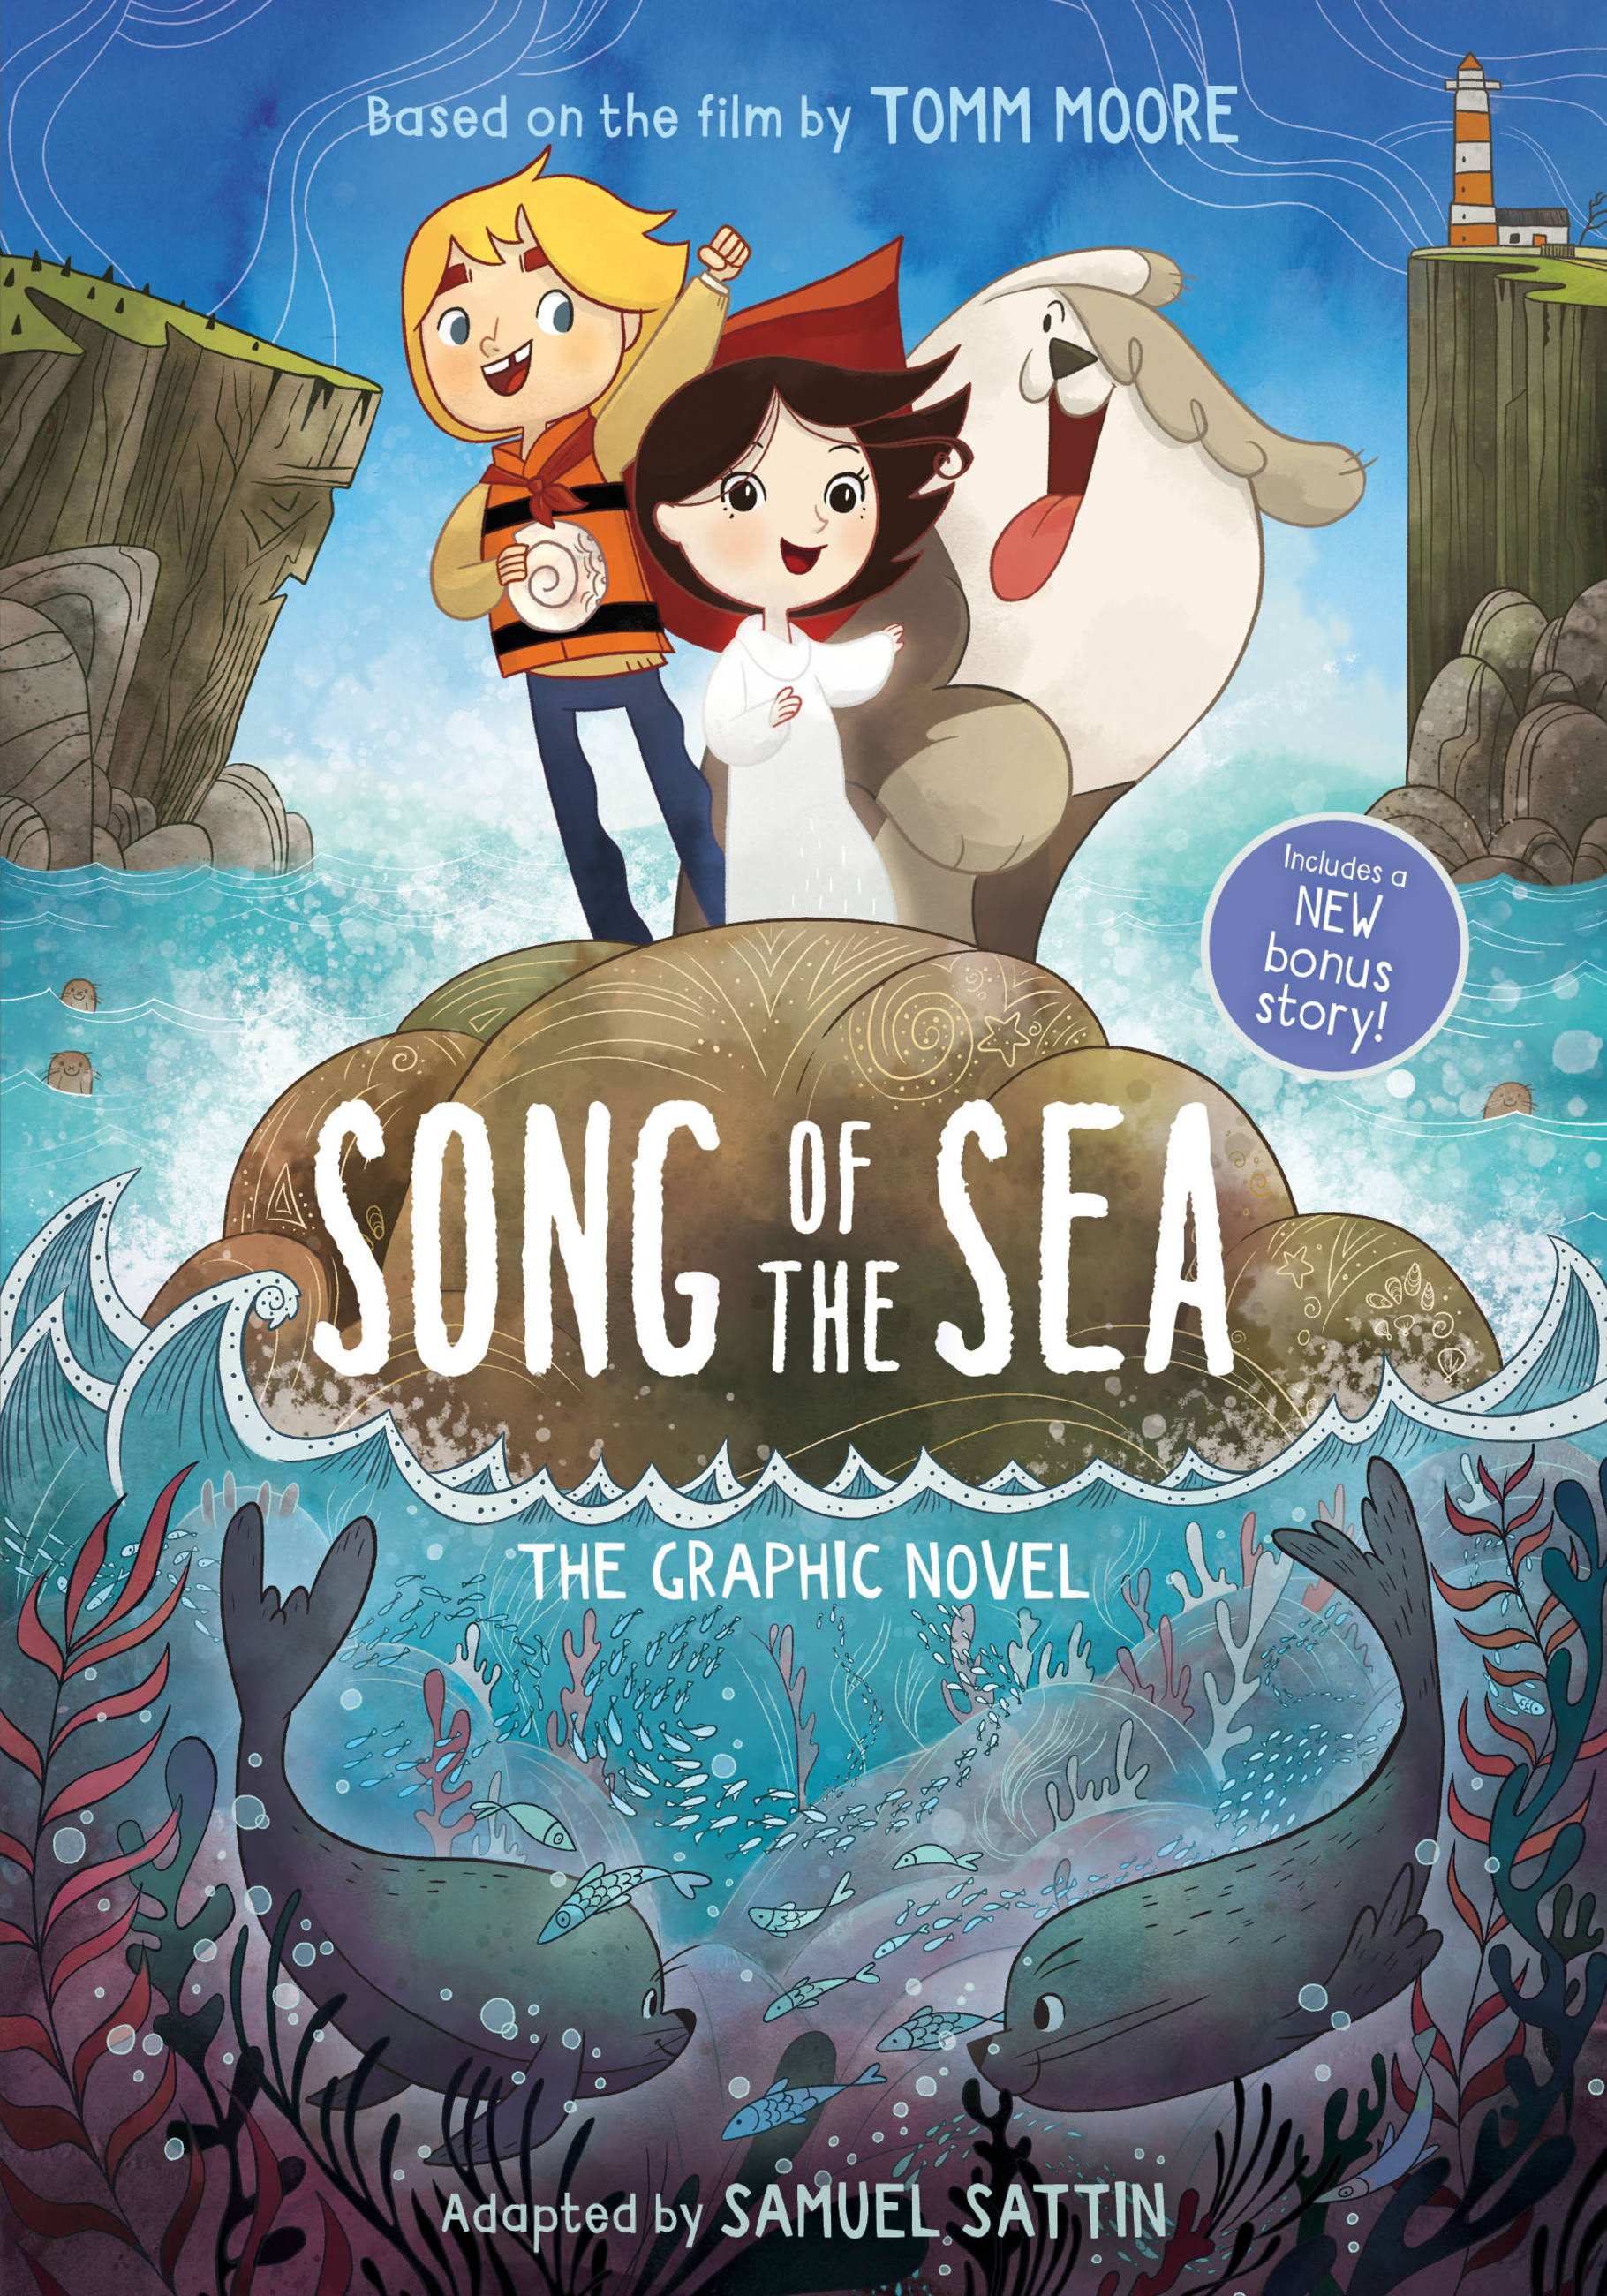 Song of the Sea: The Graphic Novel by Tomm Moore